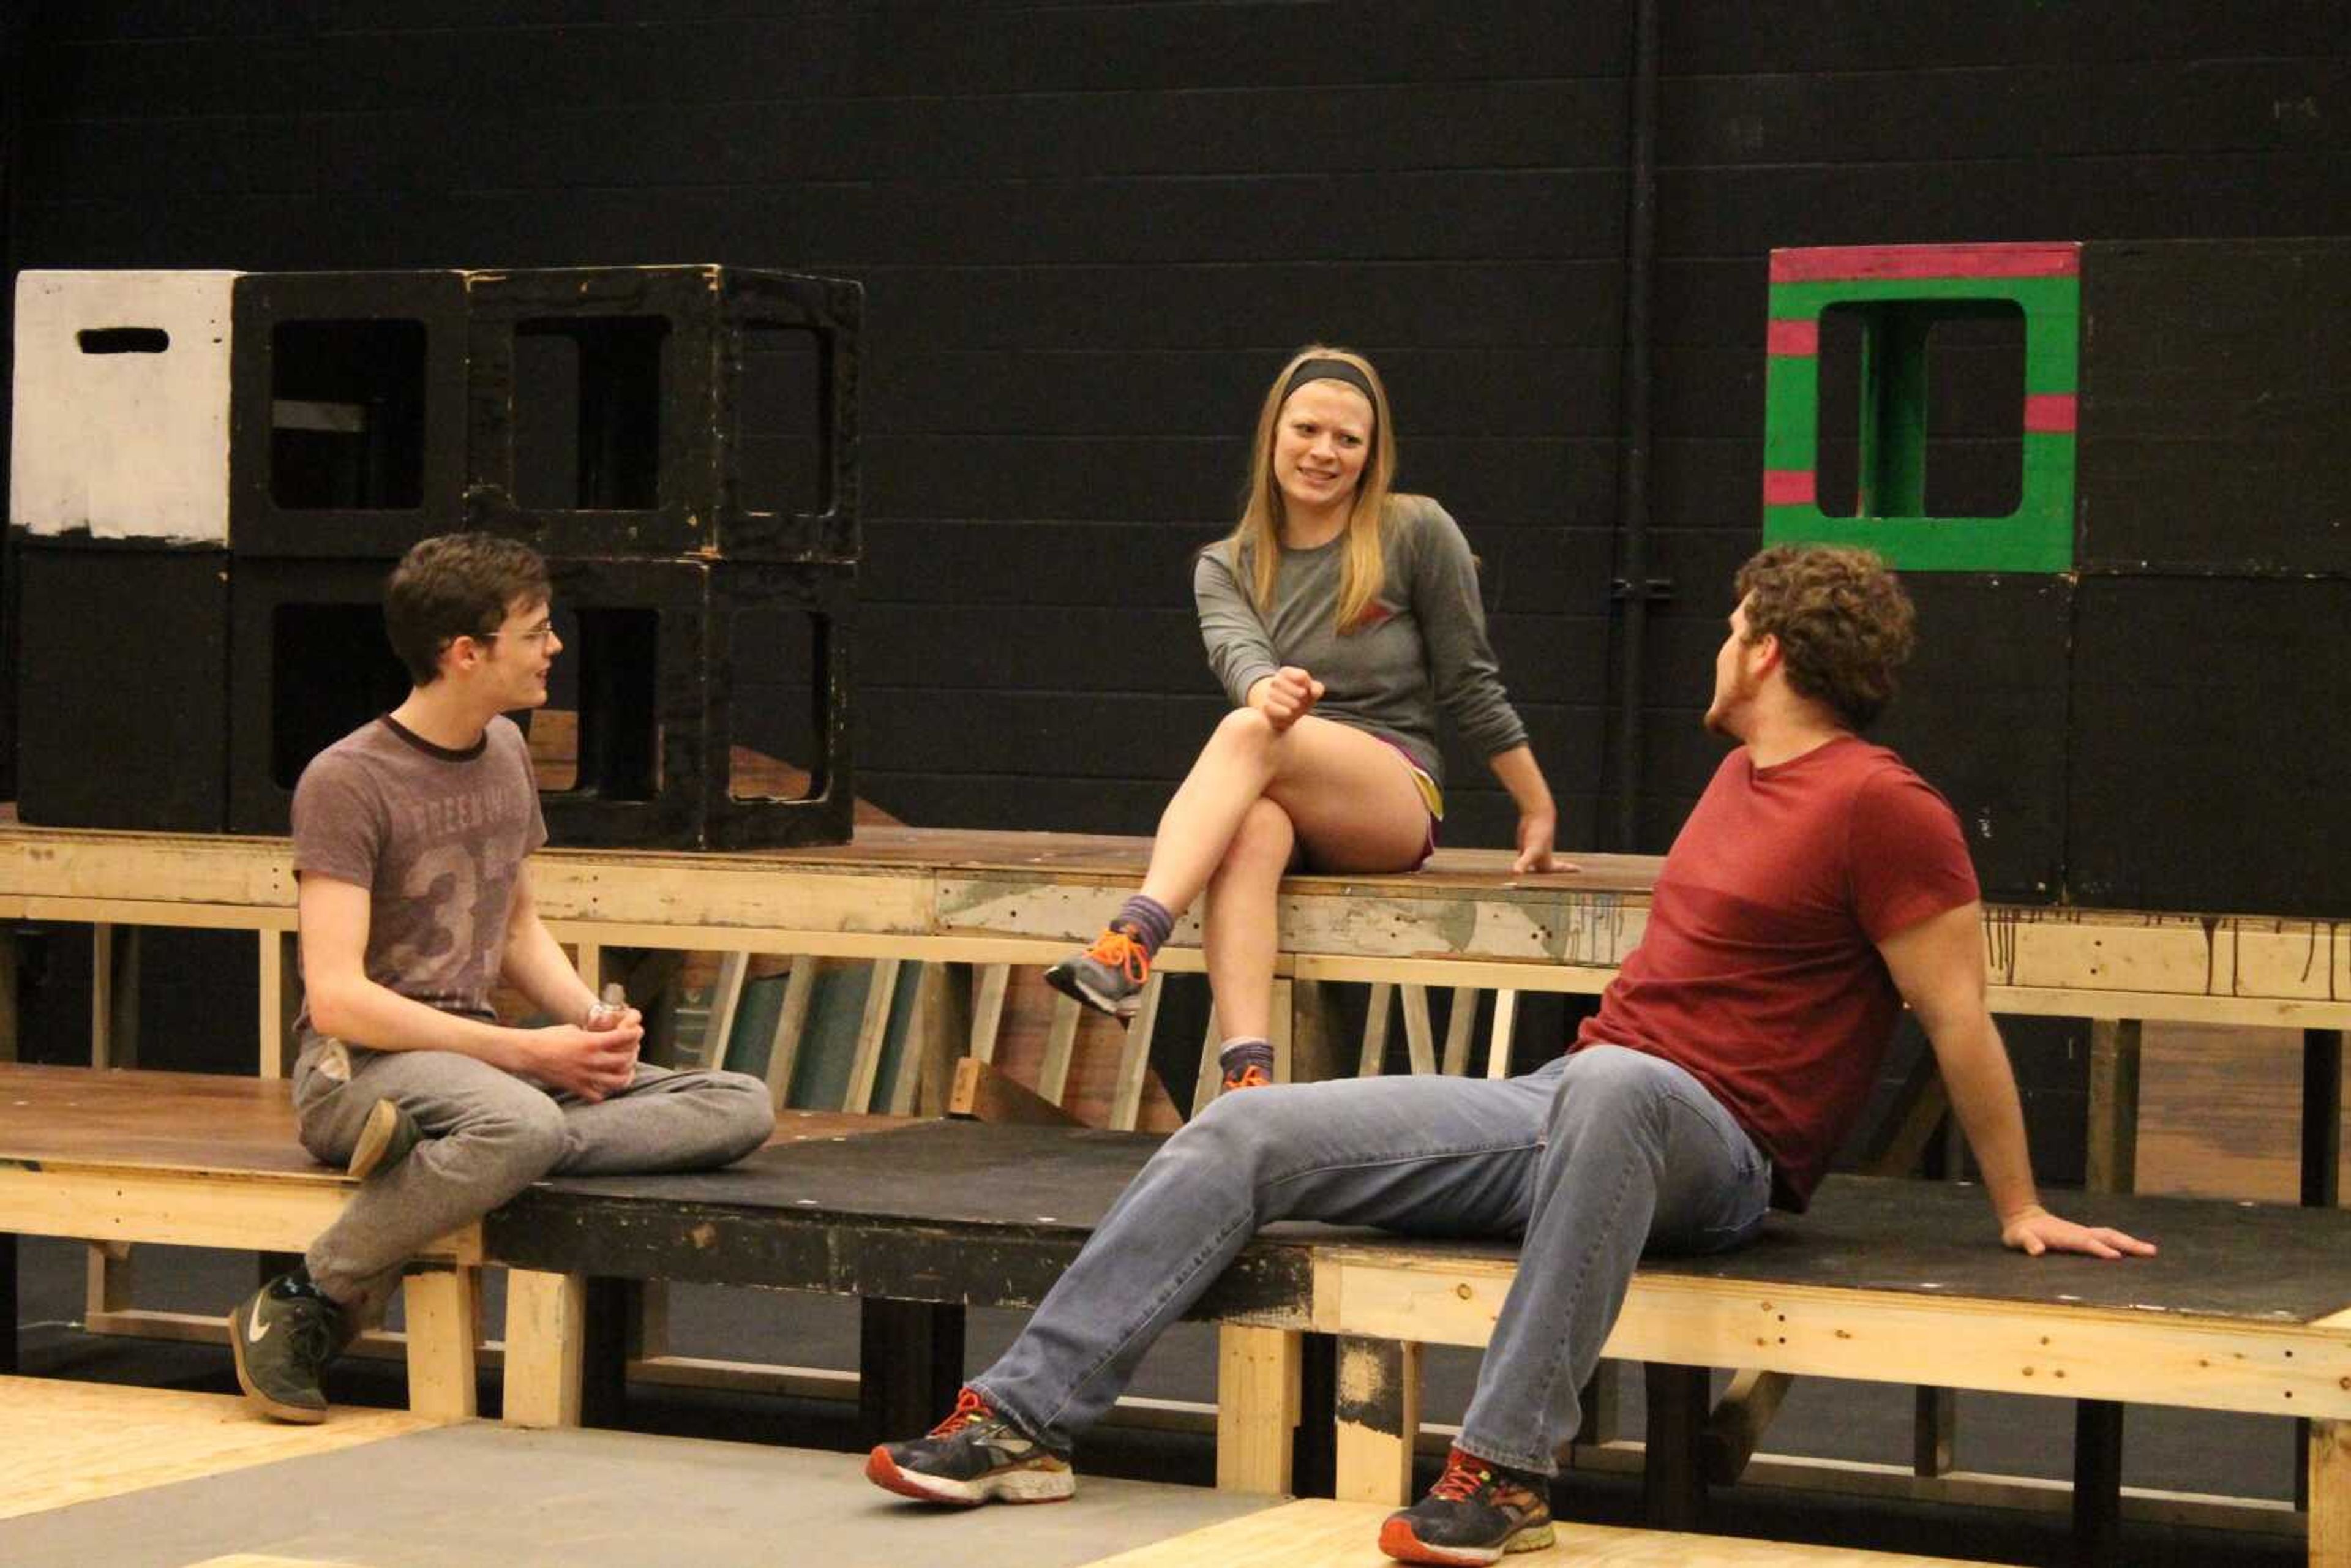 Matt Taylor, Julia Slomski and Sean McCumber rehearse a scene in preparation for the opening night of 'The Diviners' on March 23. Photo by Rebecca Gangemella